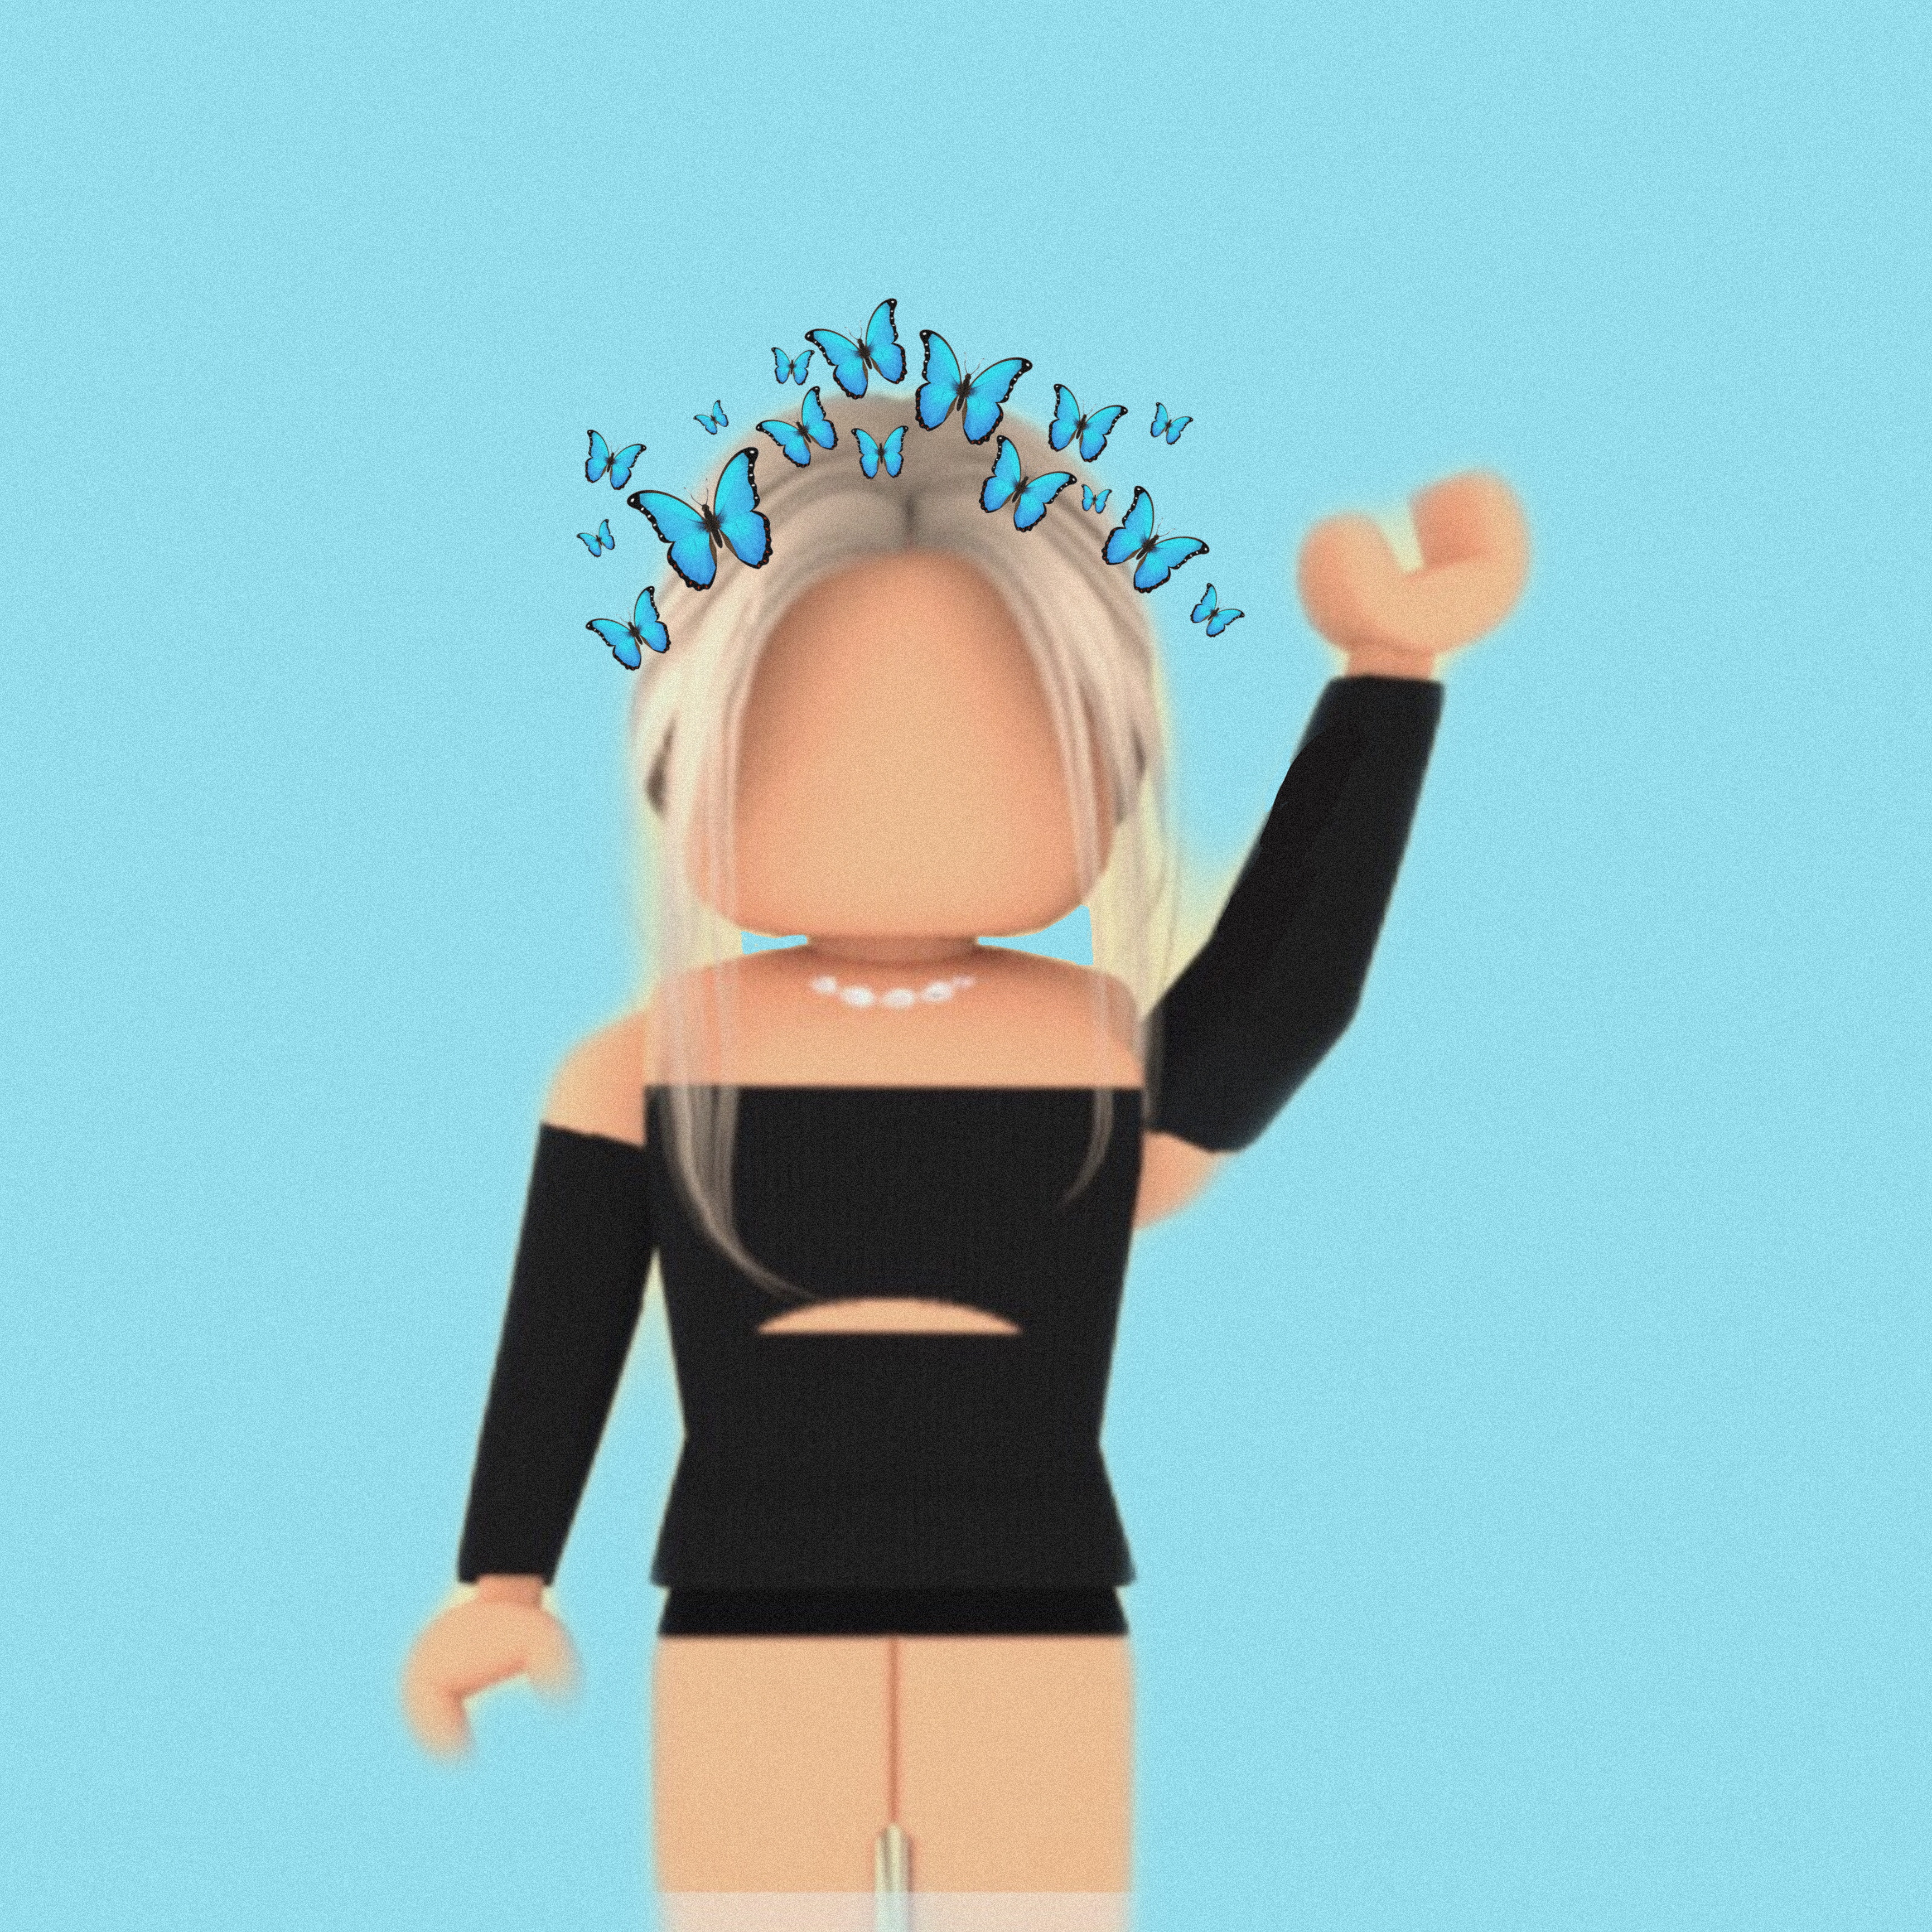 Roblox Girl Butterflies Image By Emmie - roblox girls pictures